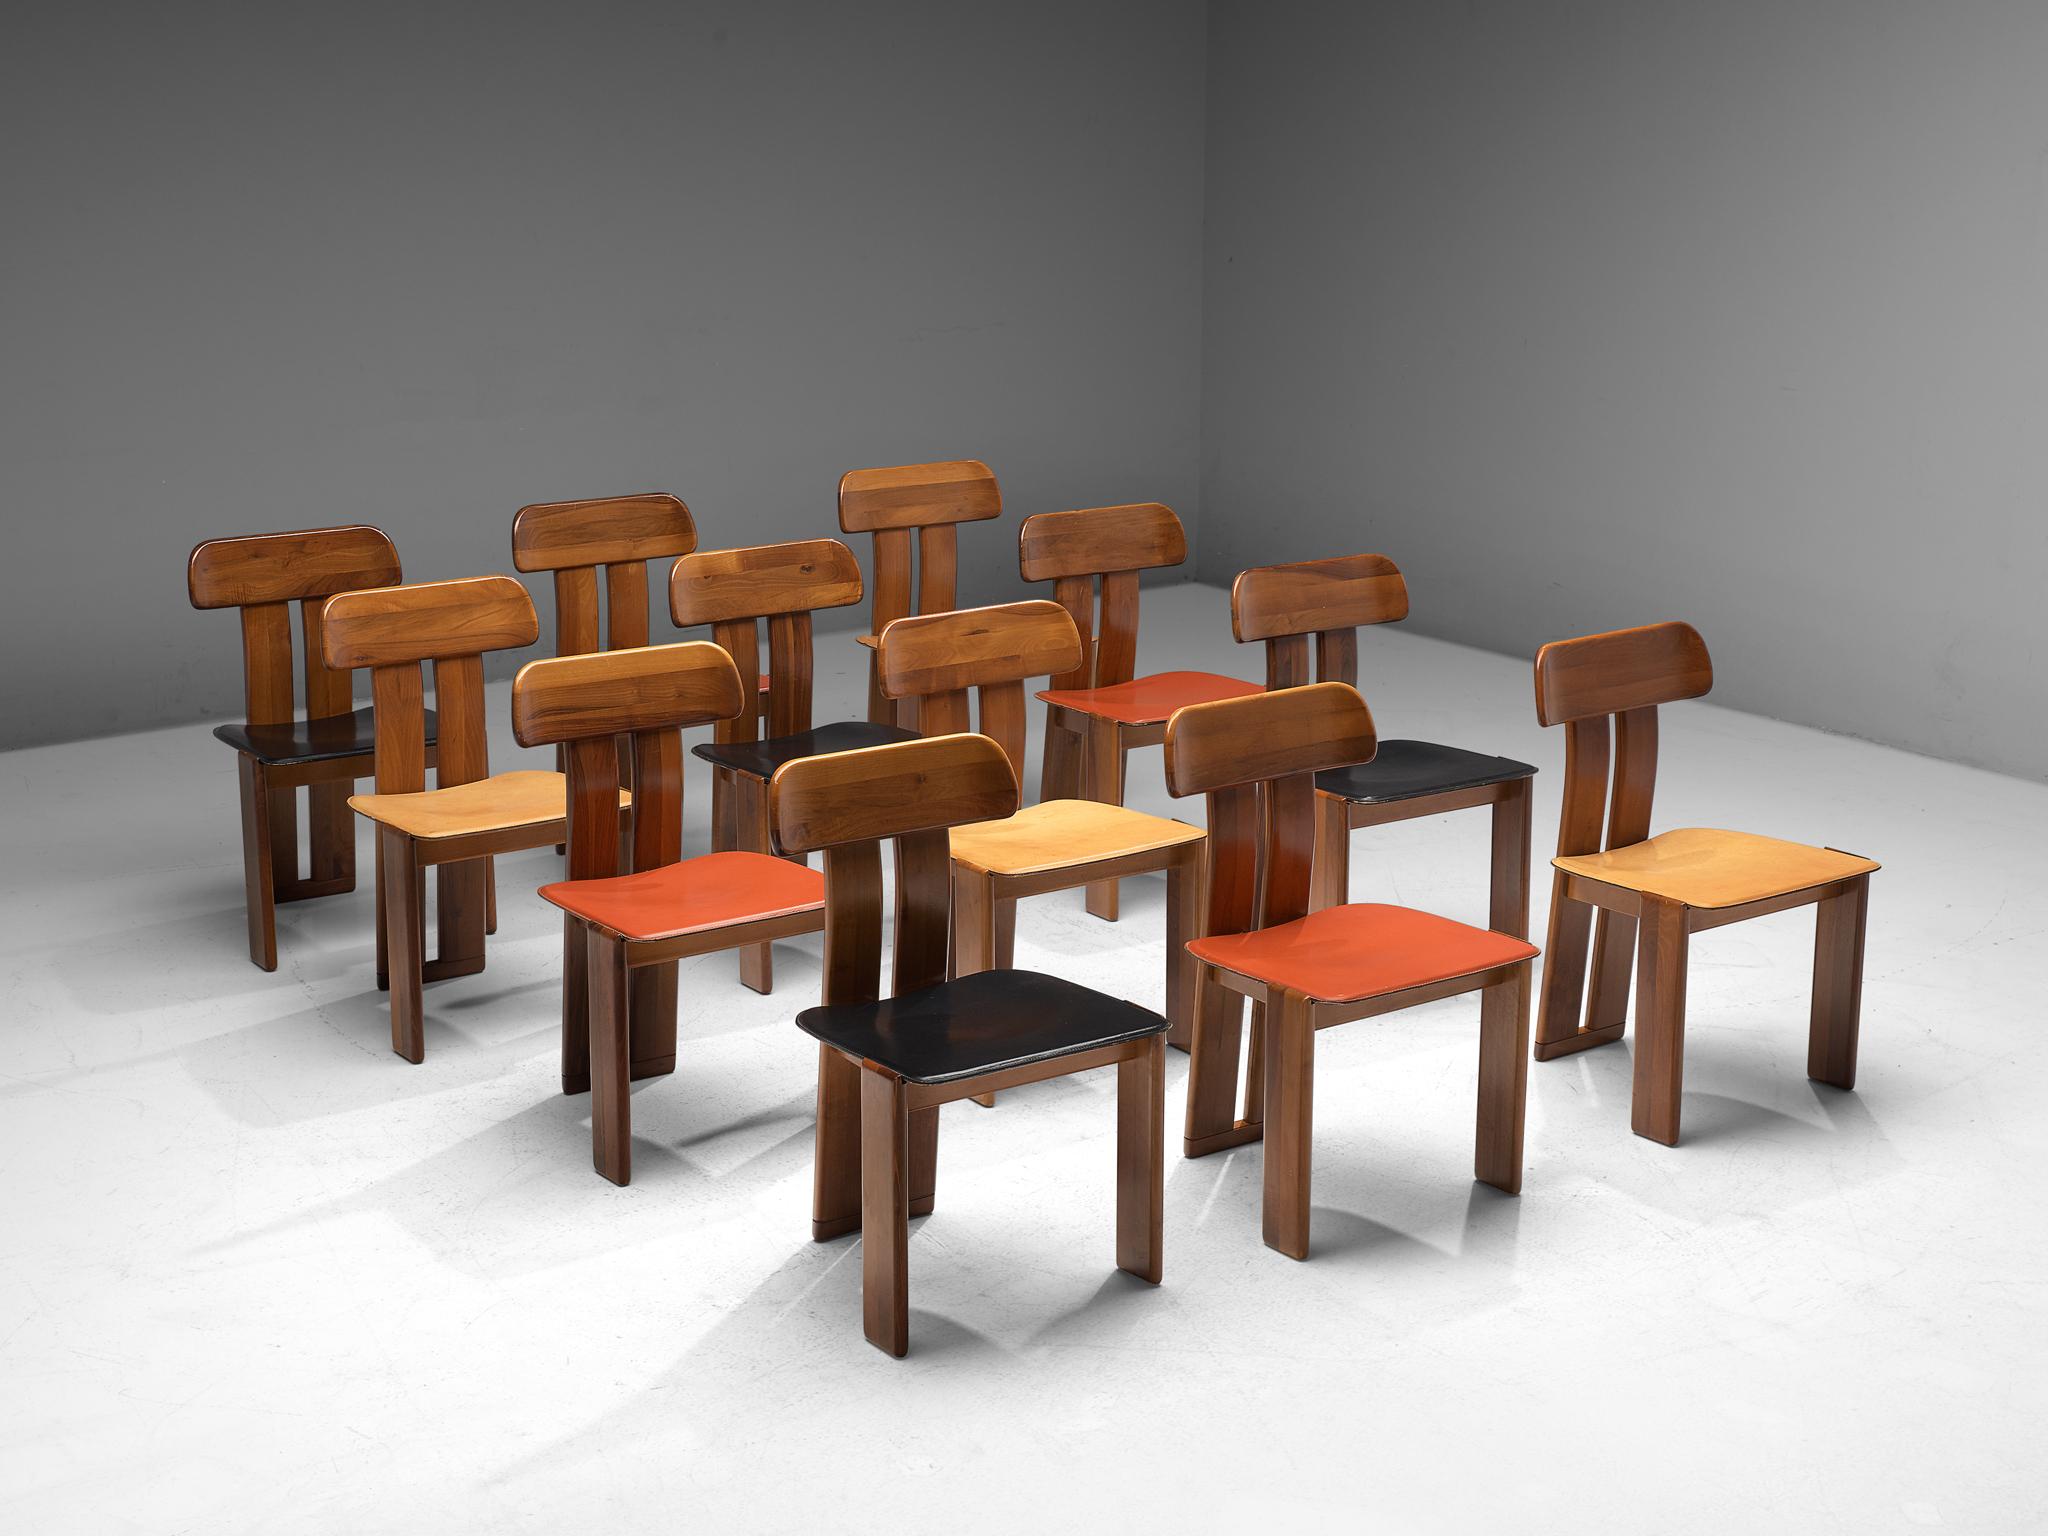 Sapporo for Mobil Girgi, 12 dining chairs, Italian walnut and leather in red, black and beige, Italy, 1970s.

Combined set of sculptural chairs that feature wonderful backrests, consisting of two vertical slats distanced from each other. At the